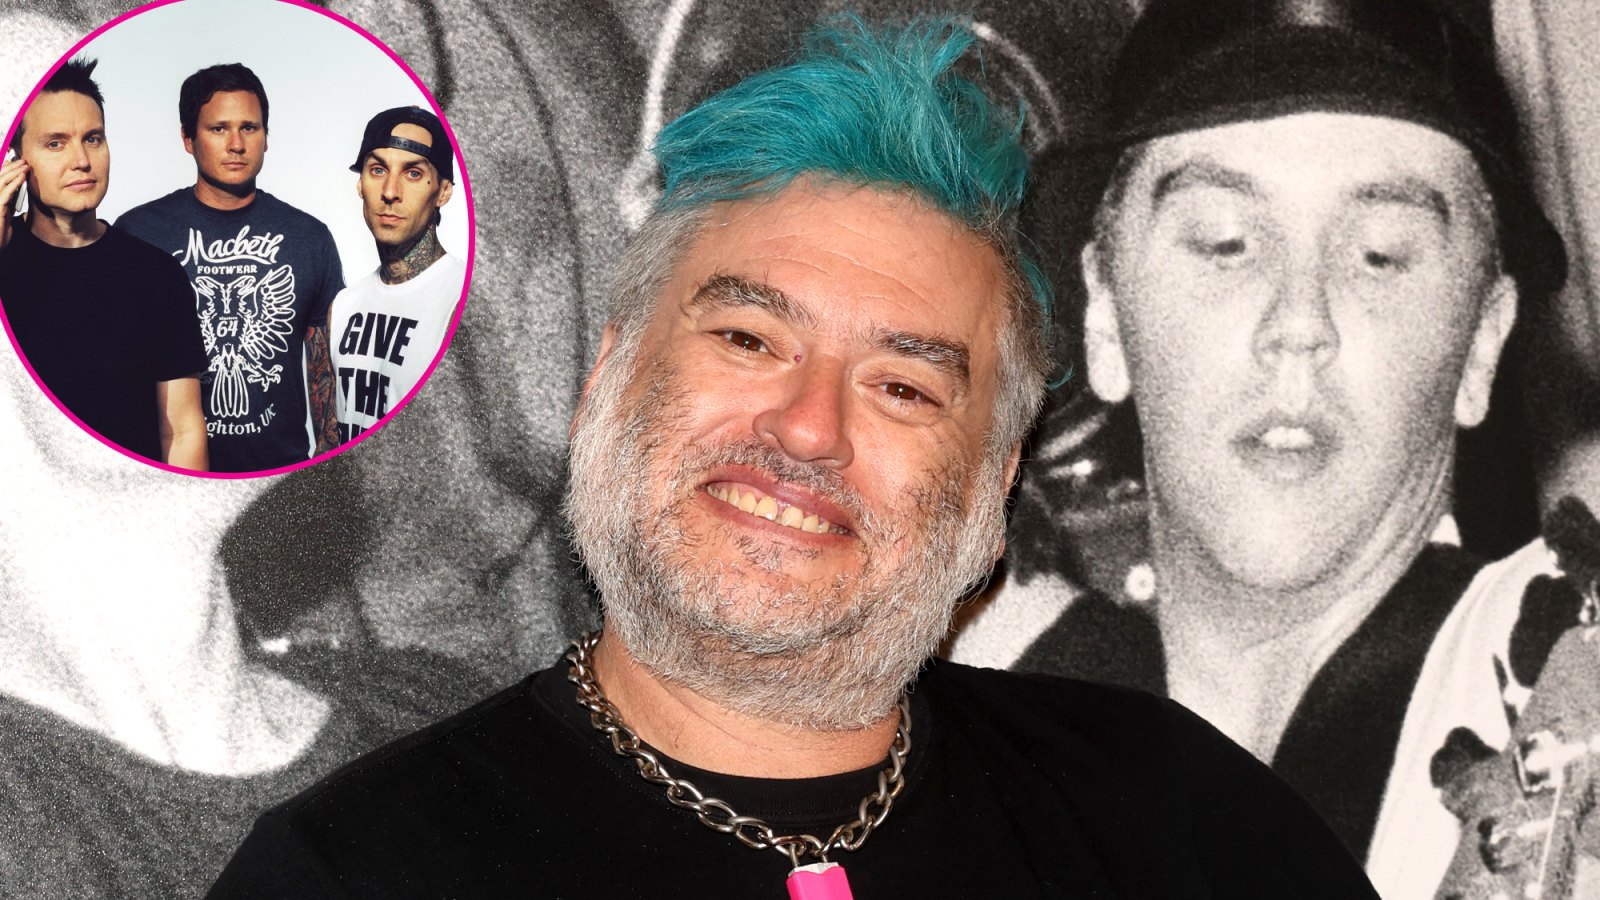 Punk Icon Fat Mike on NOFX's Last Tour and Clearing the Air with Blink-182: 'We're in a Great Place